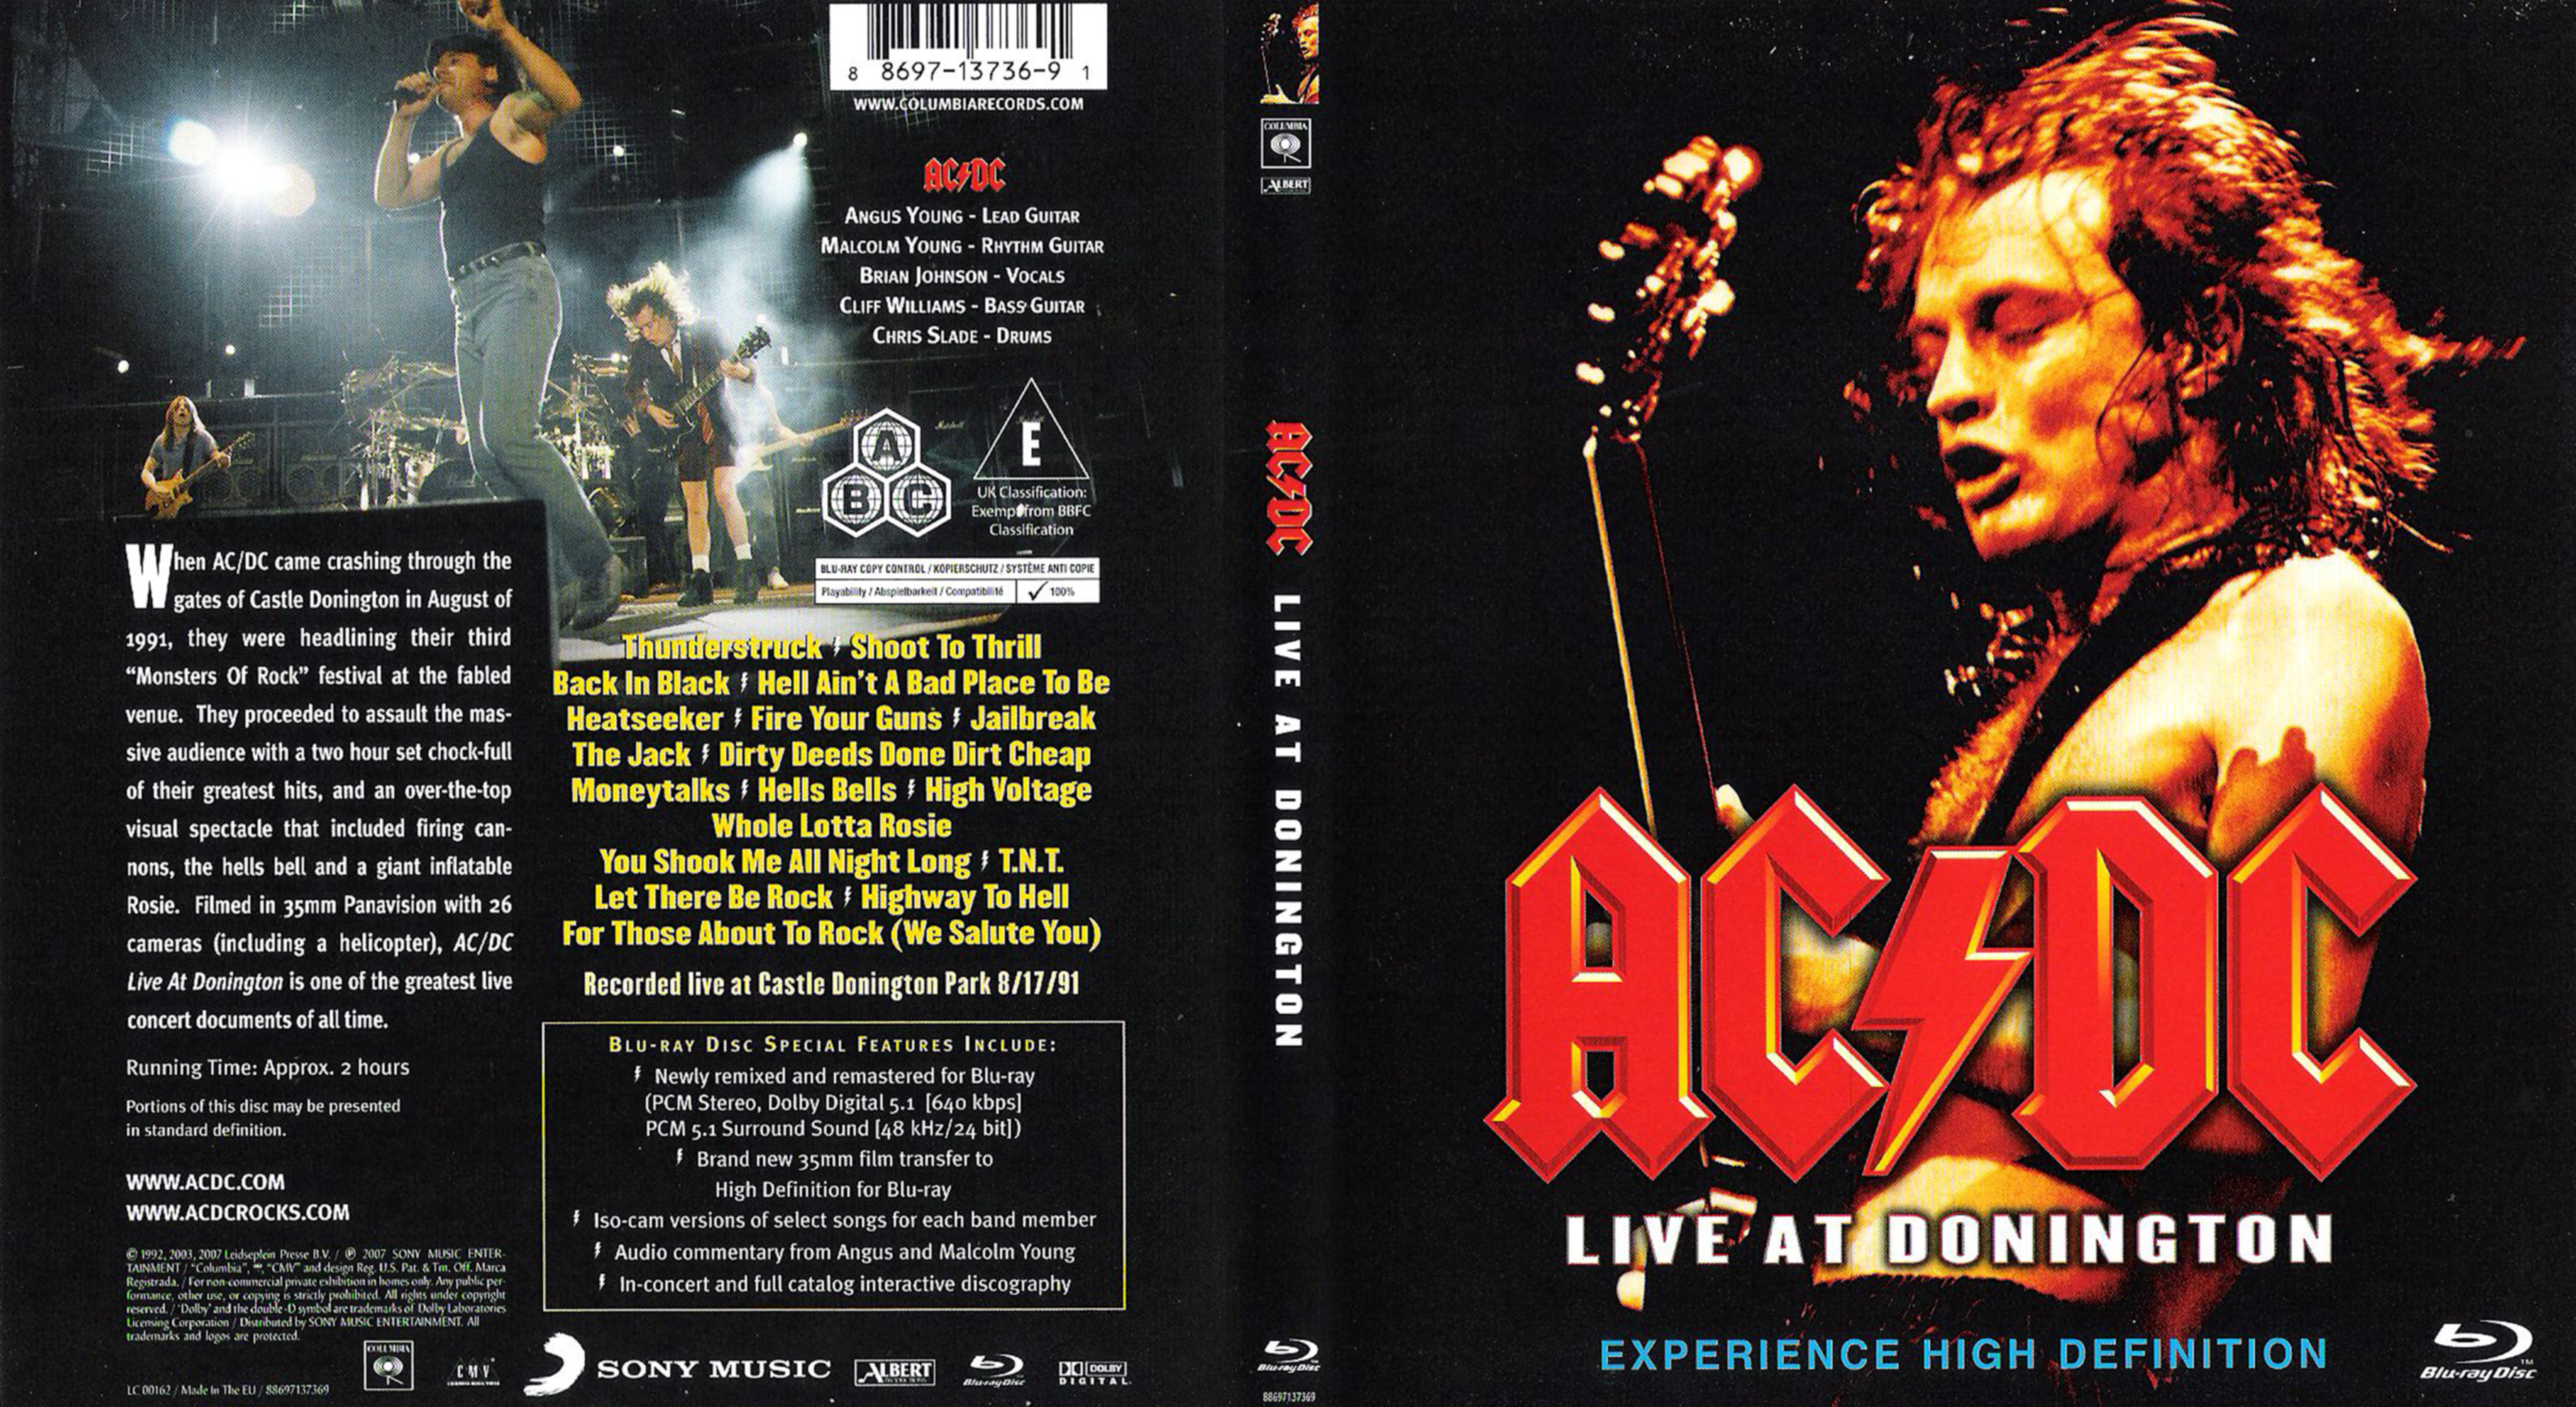 Jaquette DVD ACDC live at donington (BLU-RAY)